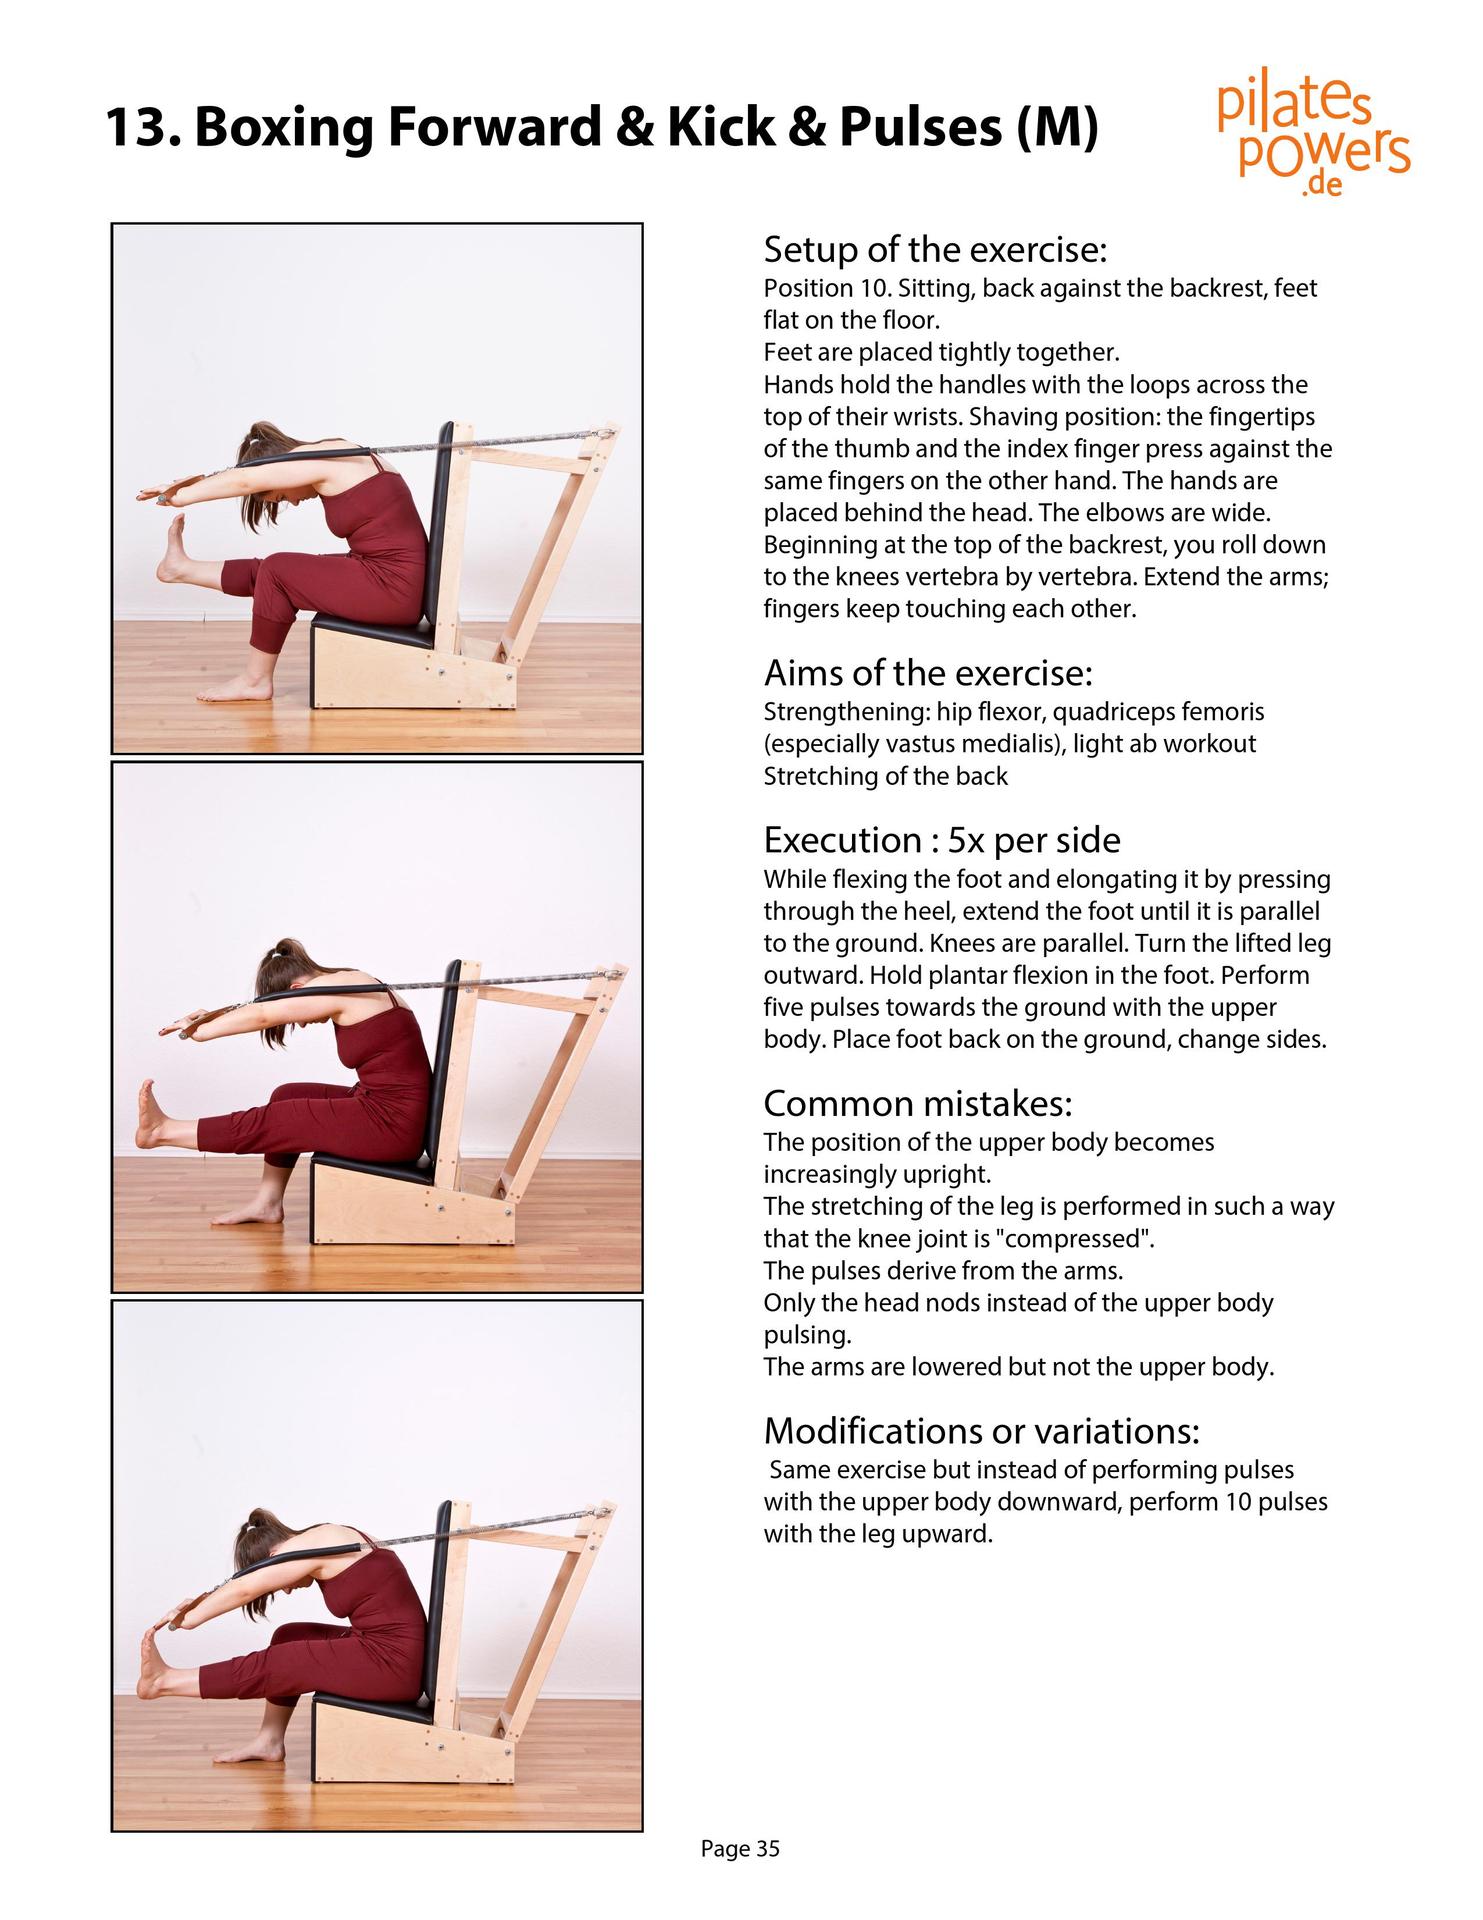 The Pilates Arm Chair The 42 most effective exercises - photo 35